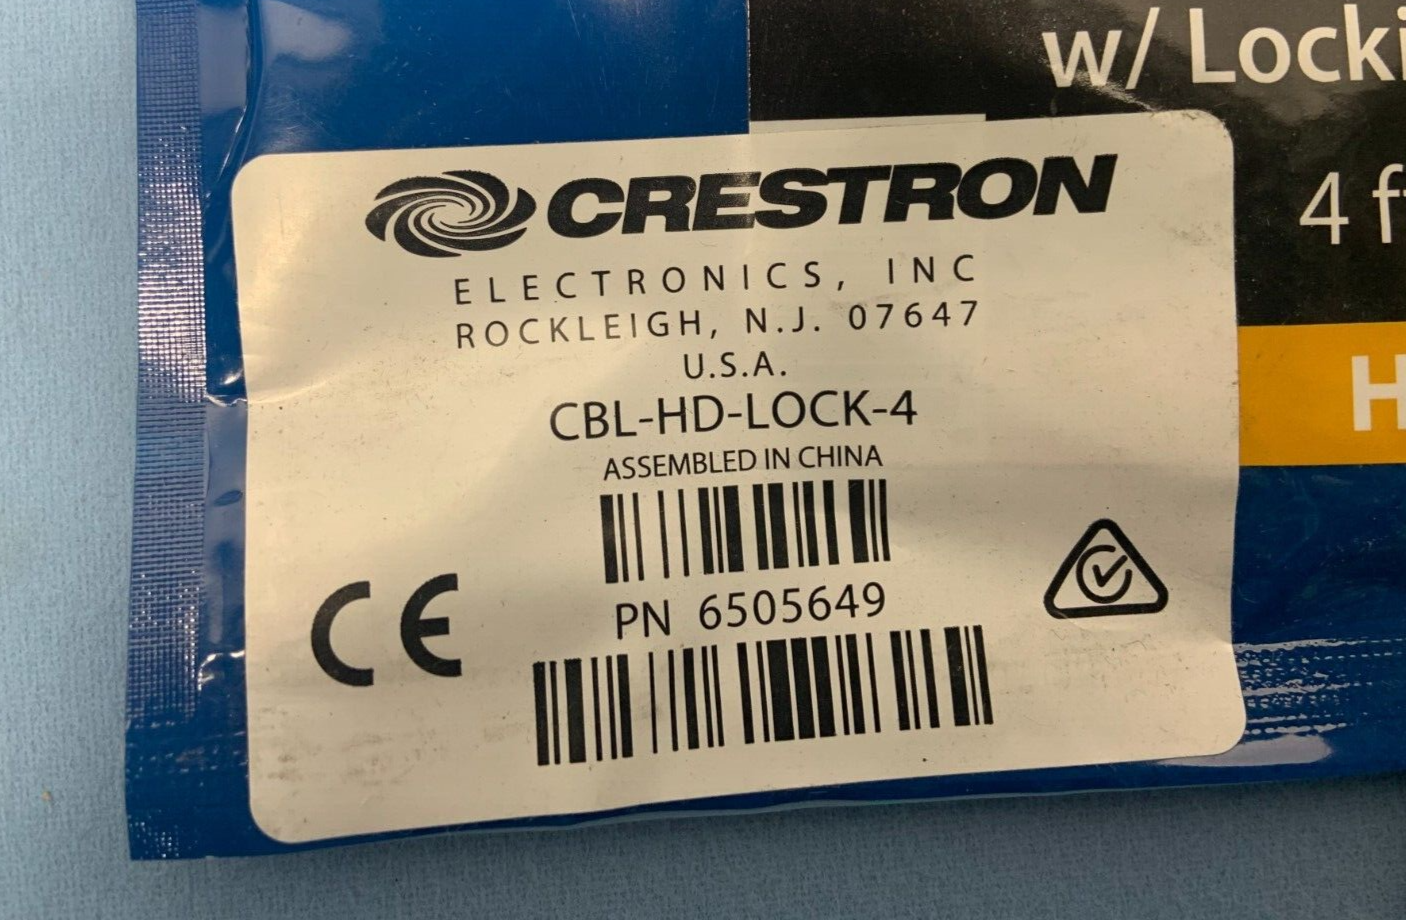 Crestron CBL-HD-LOCK-4 | 4 ft. Locking High-Speed HDMI Cables | 6505649 Lot of 5